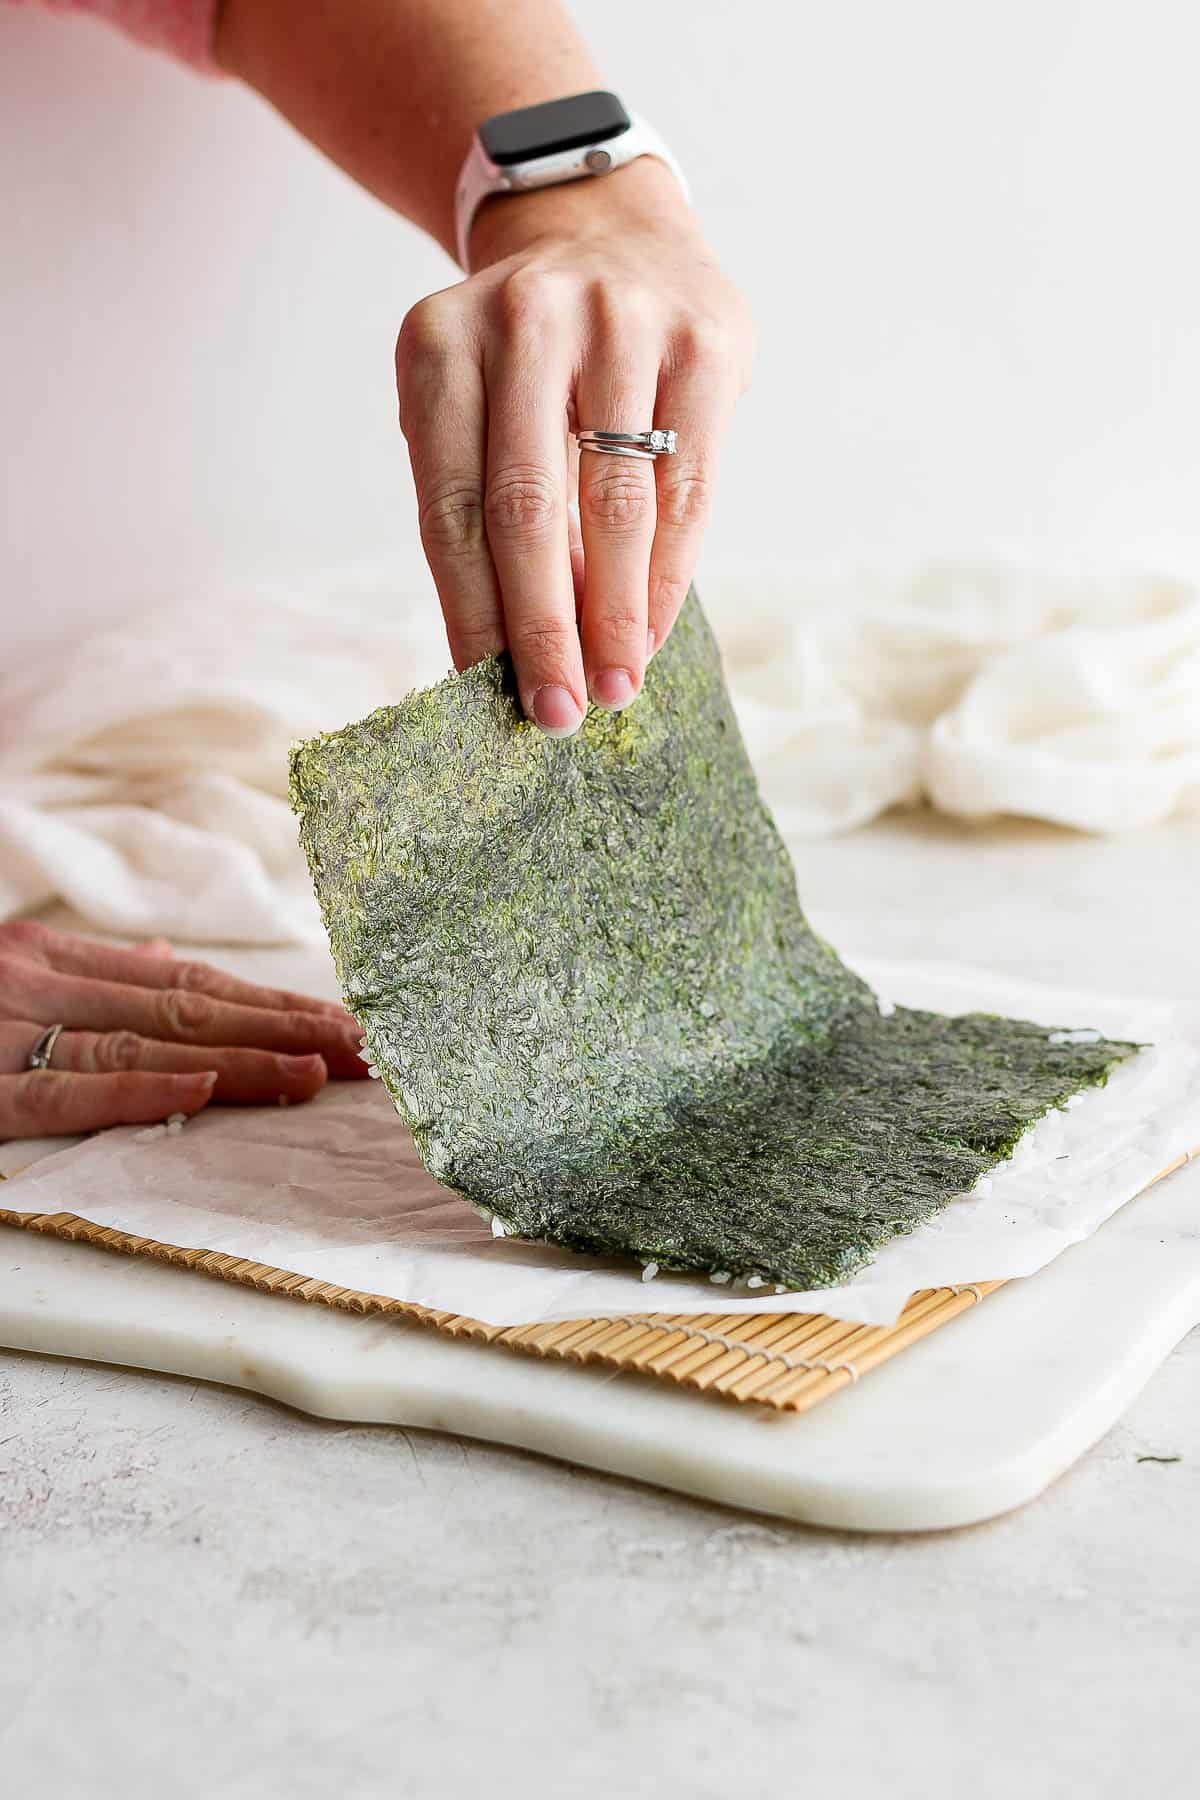 The nori sheet with rice being flipped over.